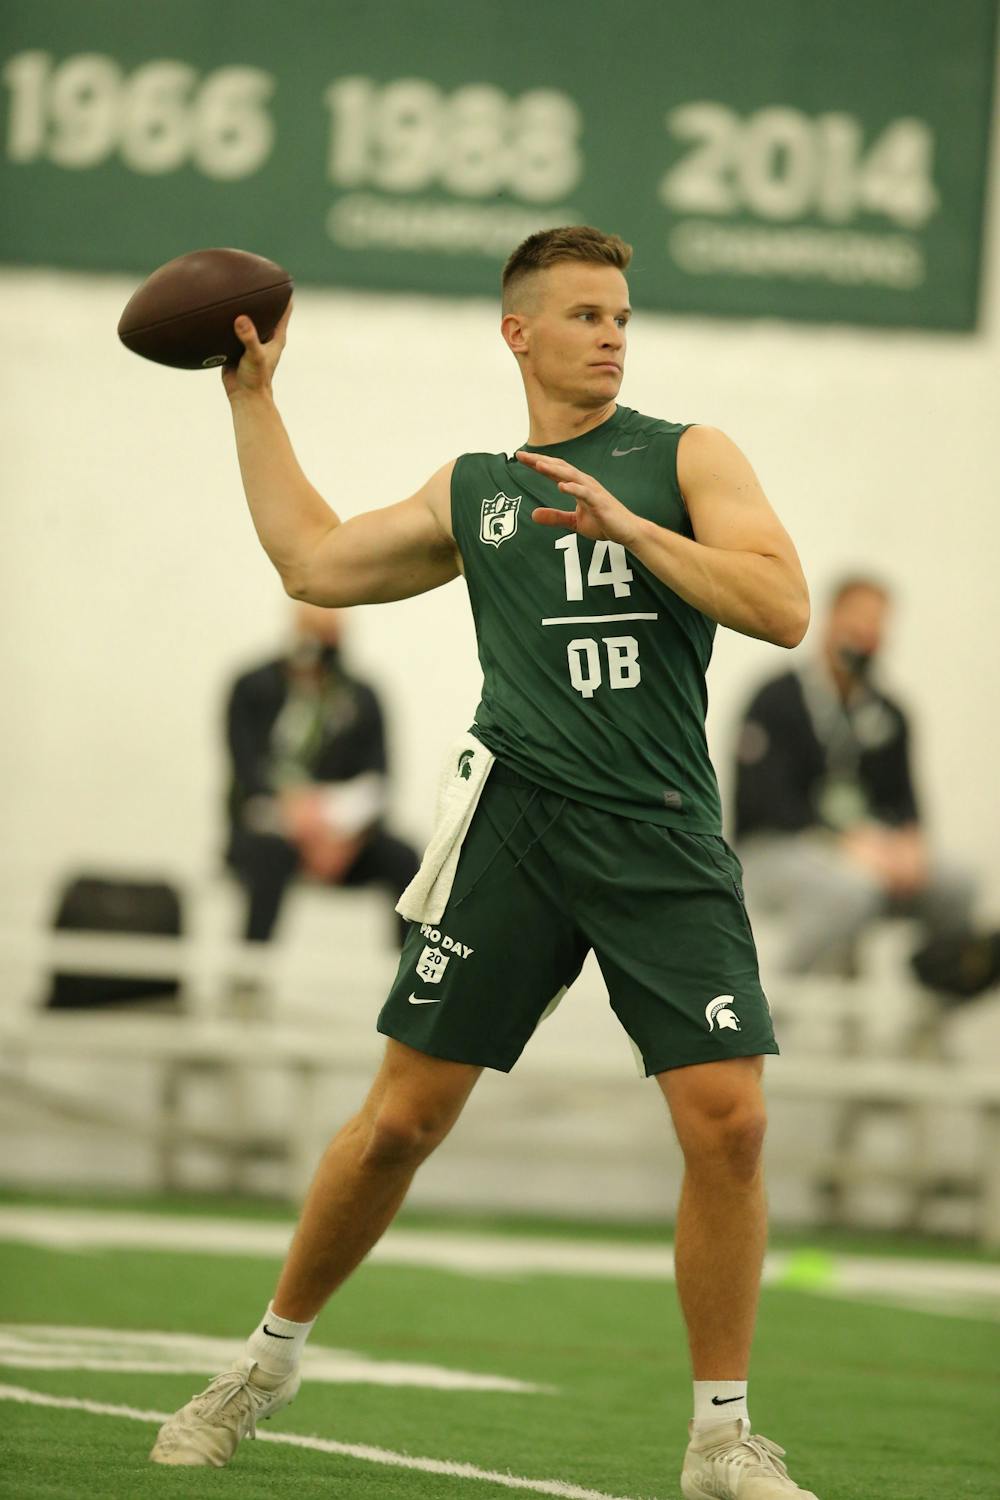 Brian Lewerke throws during a drill on March 24, 2021 at MSU Football's indoor practice facility. Lewerke left the program for the NFL following the conclusion of the 2019-20 season and played for the New England Patriots during his first season in the NFL.